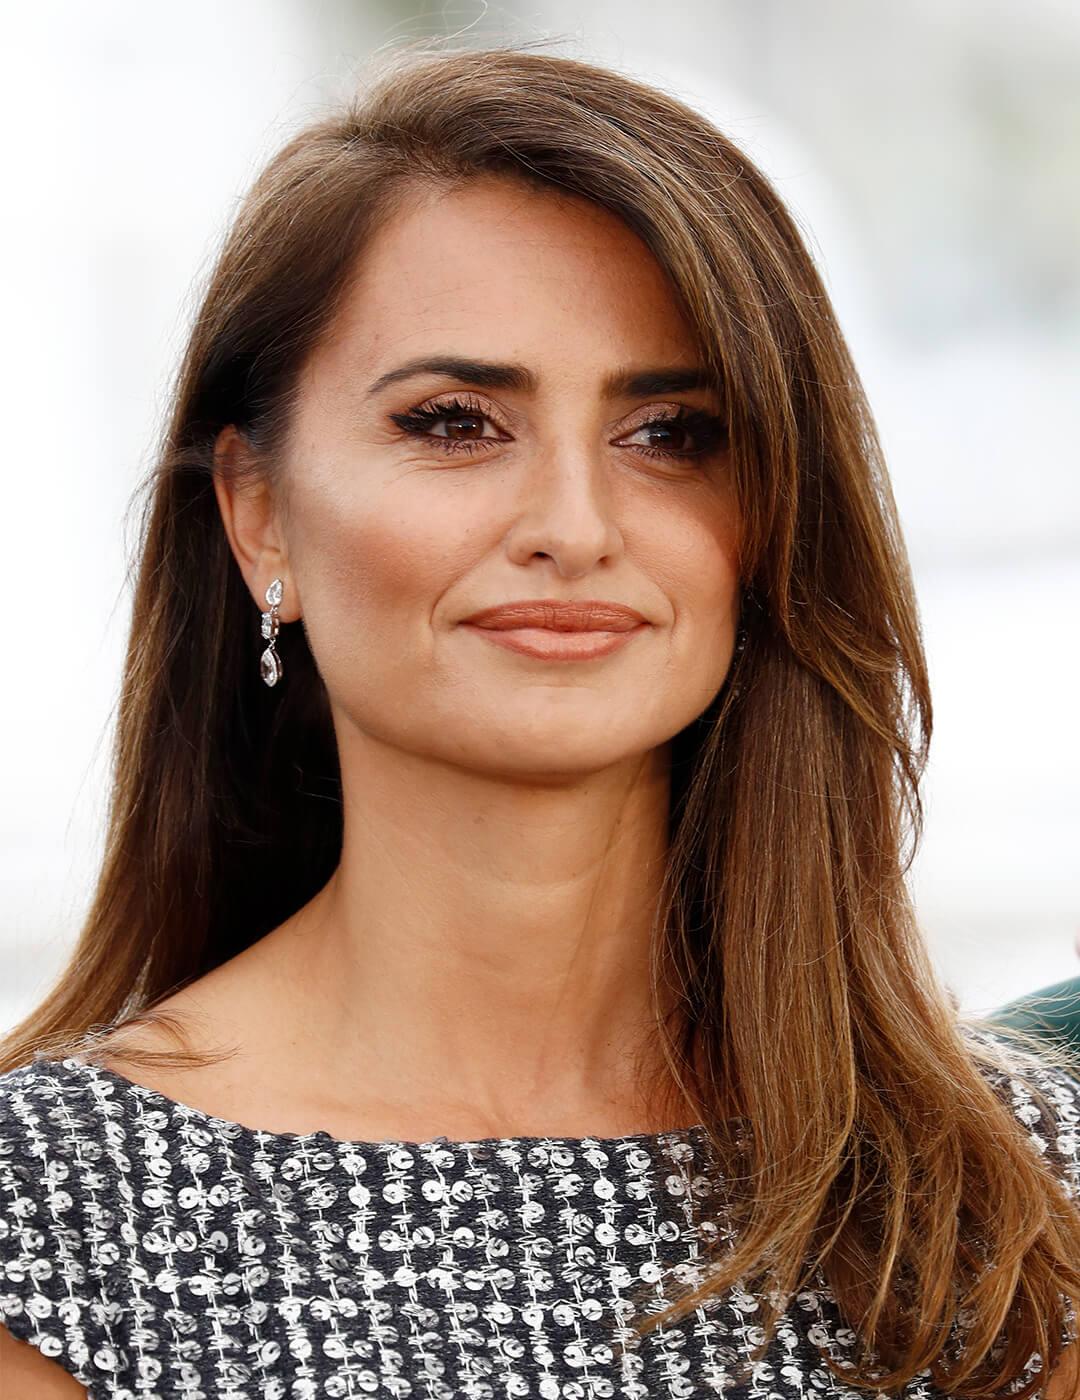 A photo of Penelope Cruz with side-swept bangs with a nude makeup look